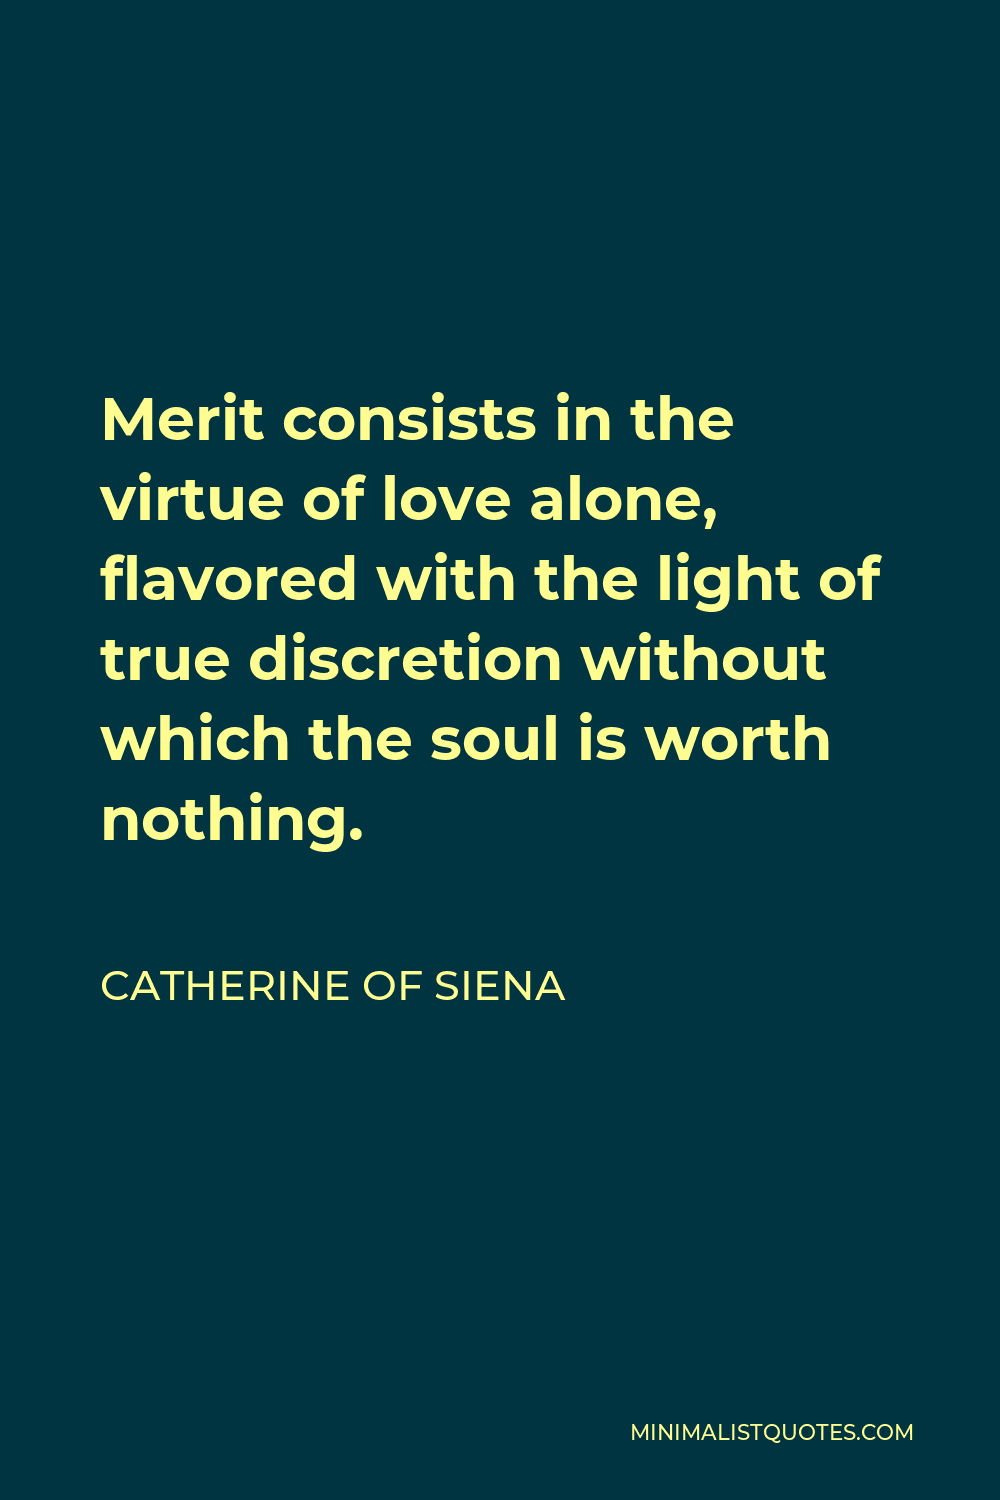 Catherine of Siena Quote - Merit consists in the virtue of love alone, flavored with the light of true discretion without which the soul is worth nothing.